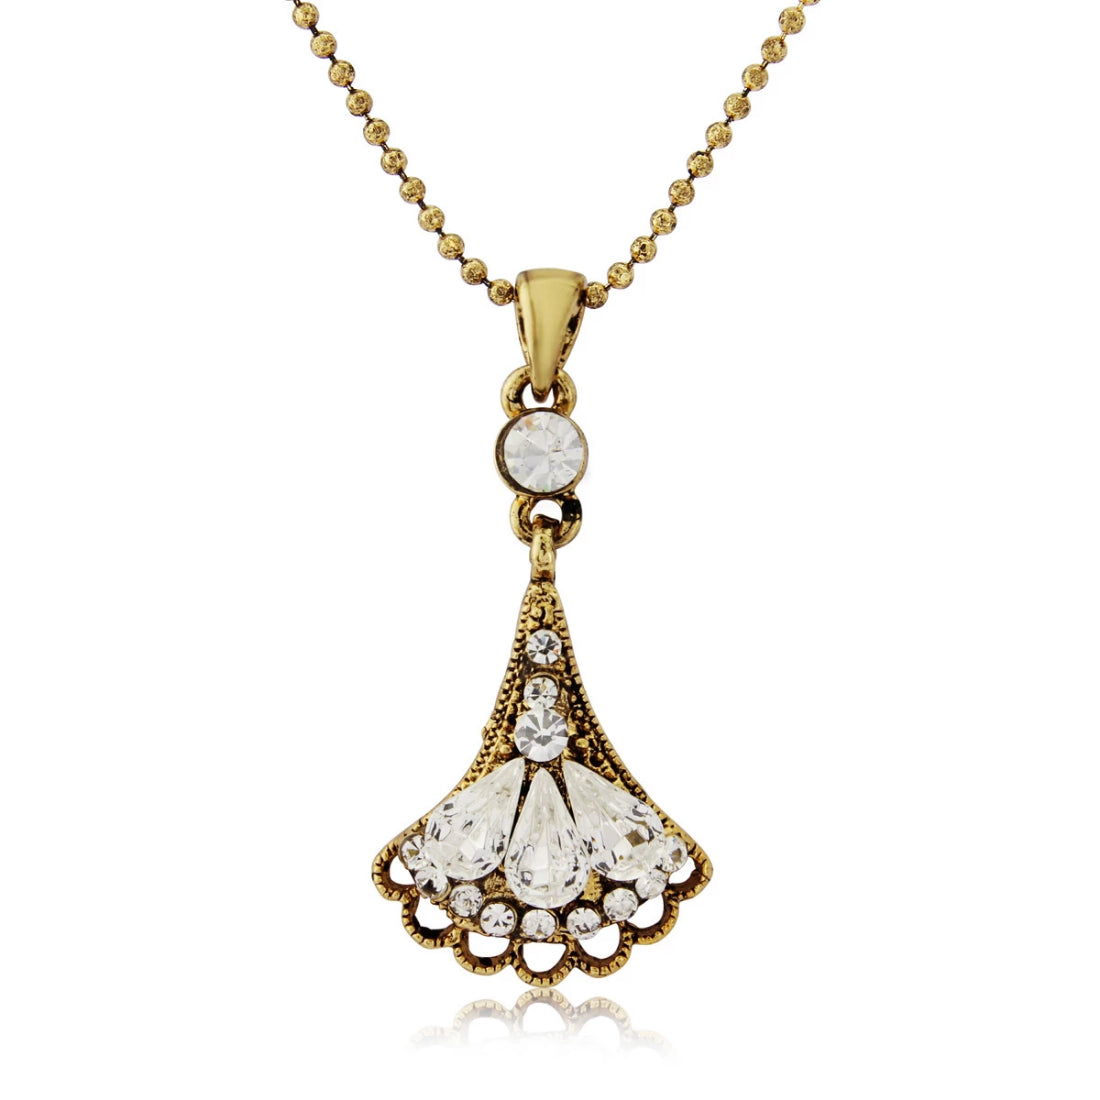 Glamour of Deco gold crystal pendant